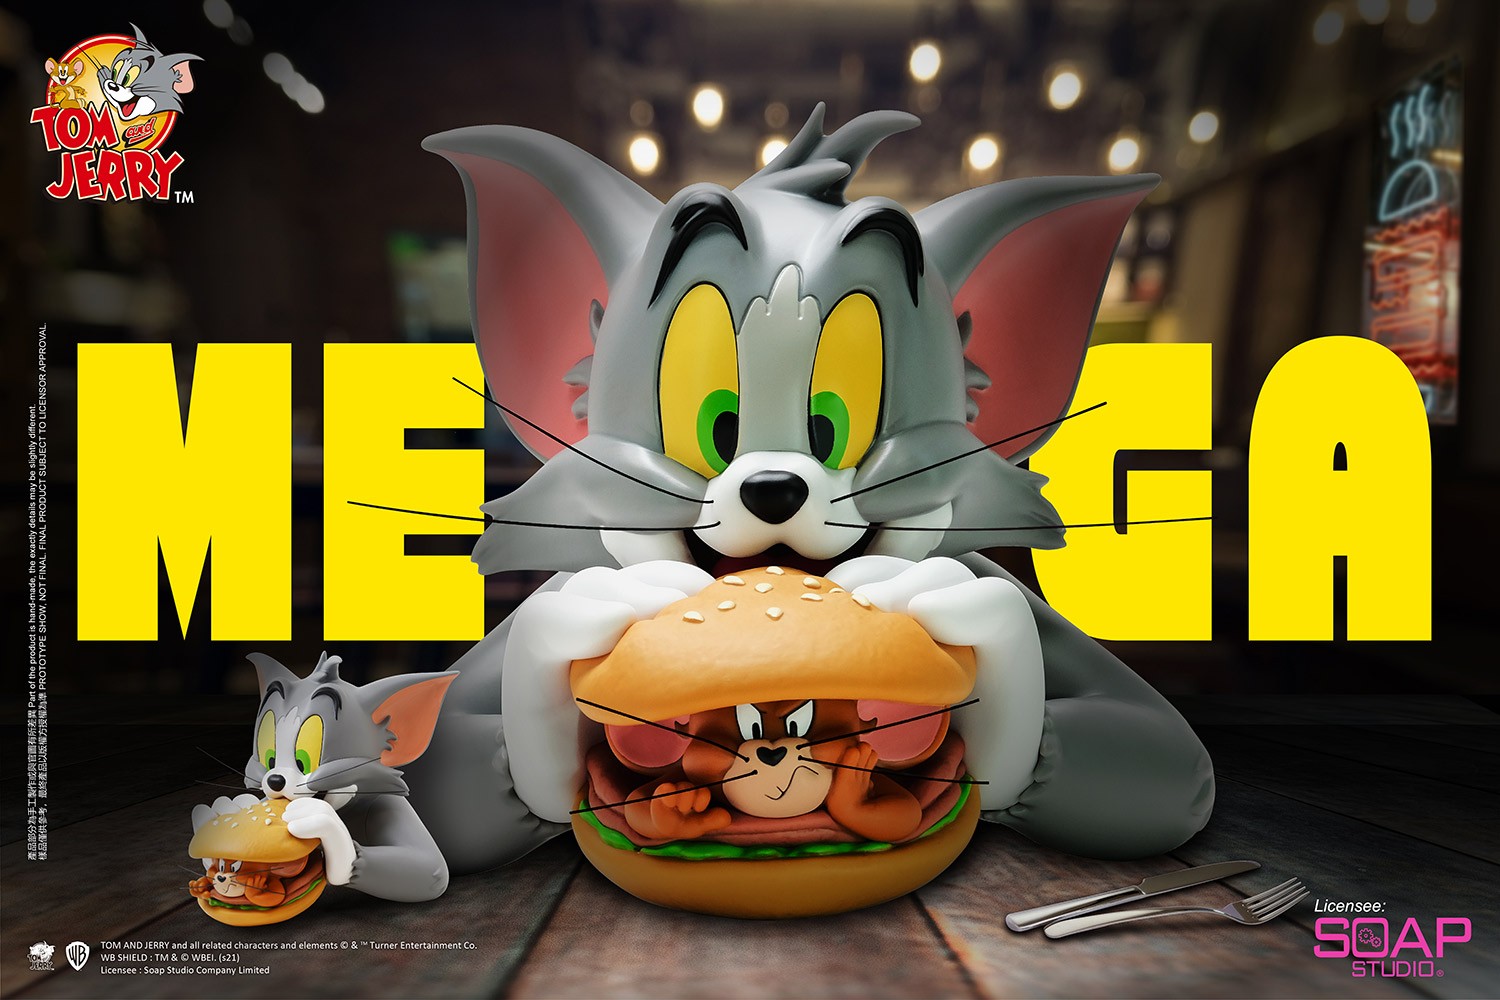 Tom and Jerry Mega Burger (Prototype Shown) View 2